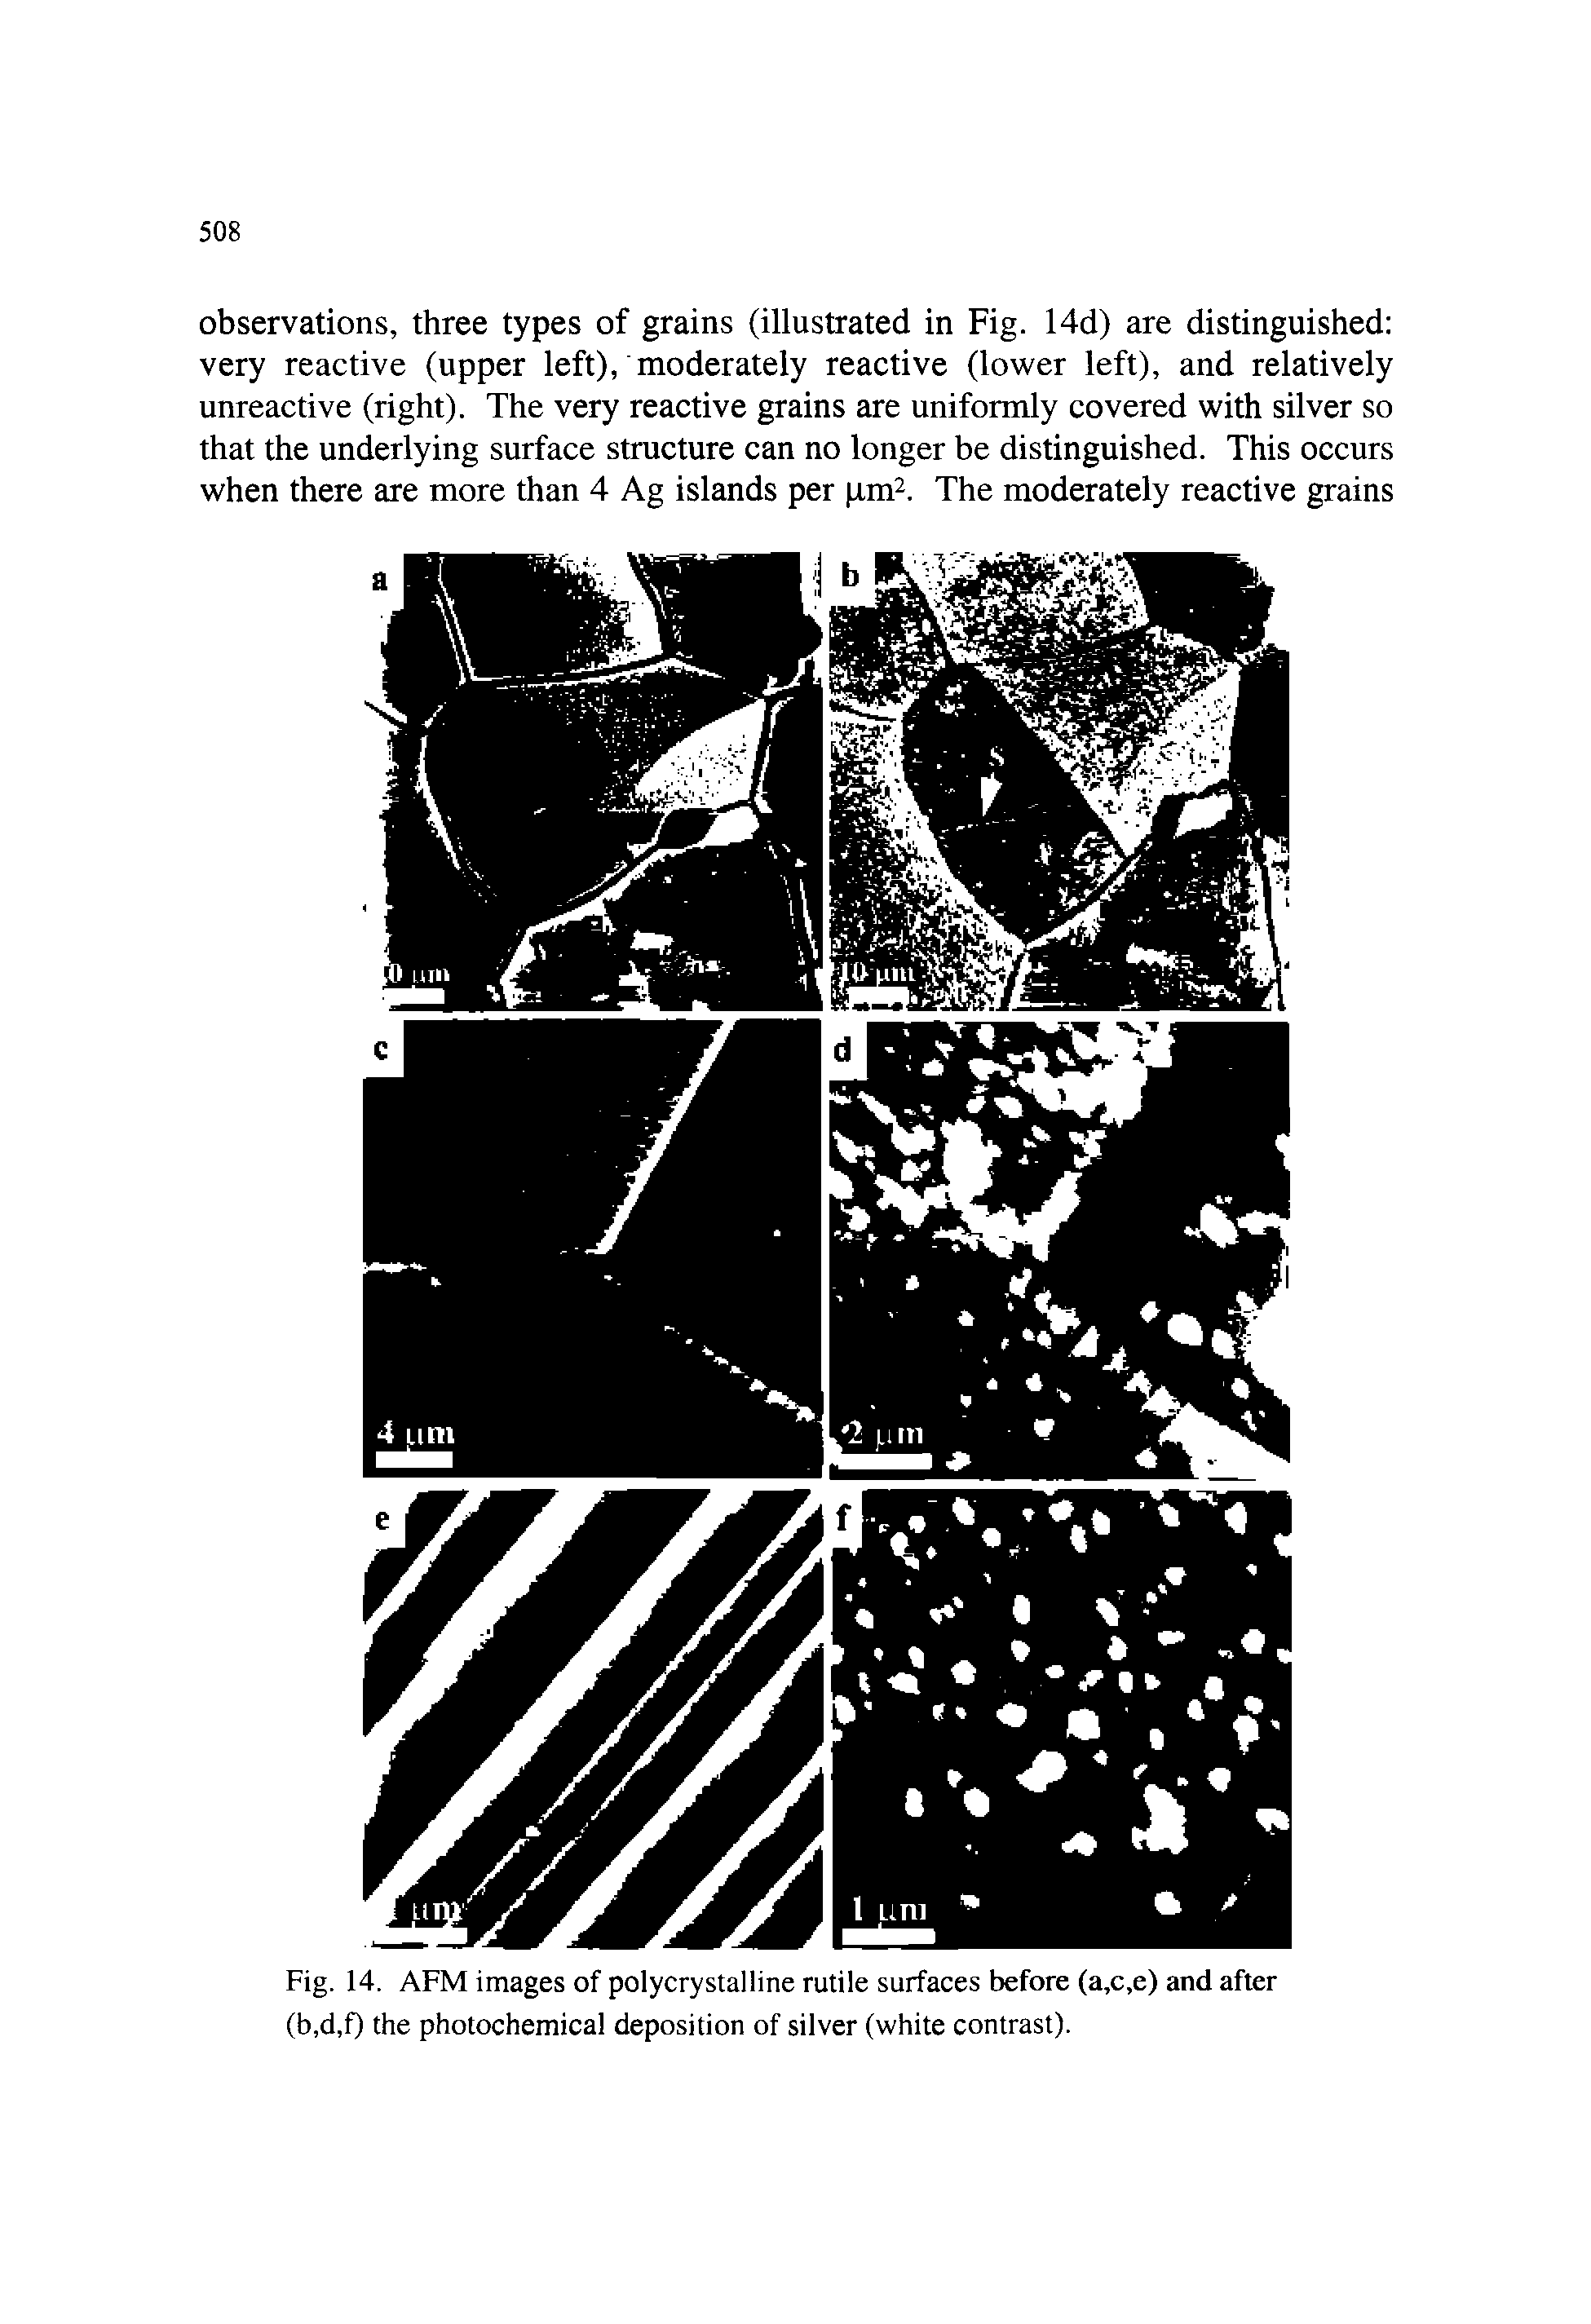 Fig. 14. AFM images of polycrystalline rutile surfaces before (a,c,e) and after (b,d,f) the photochemical deposition of silver (white contrast).